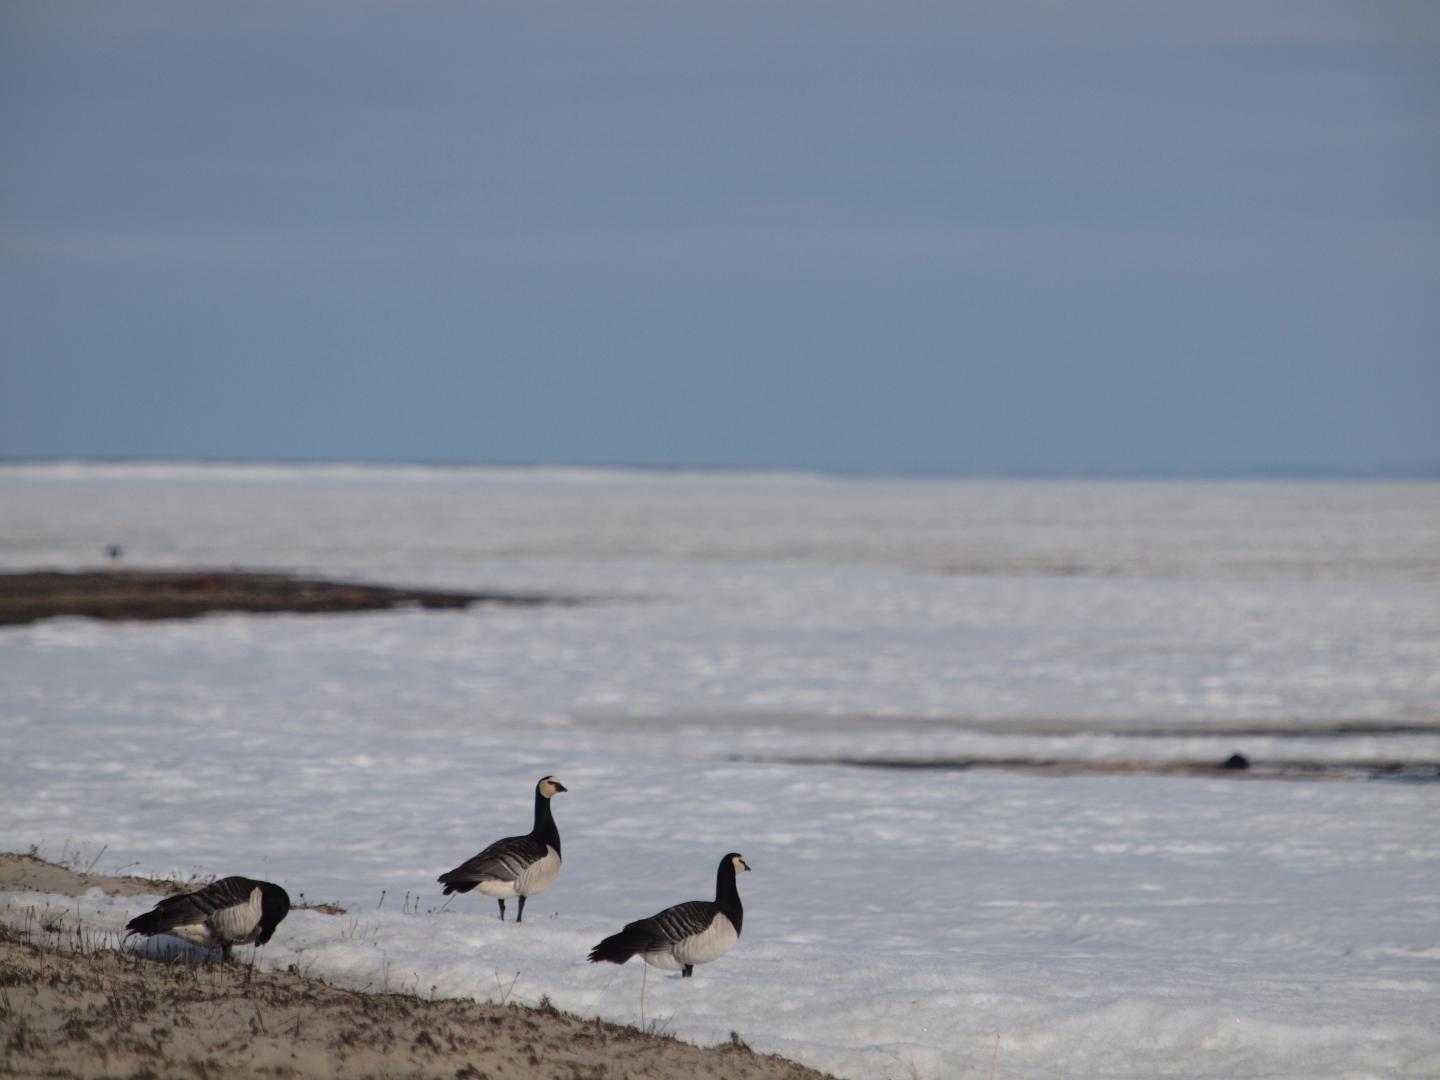 Barnacle Geese in the Snow at the Kolokolkova Bay (Northern Russia)